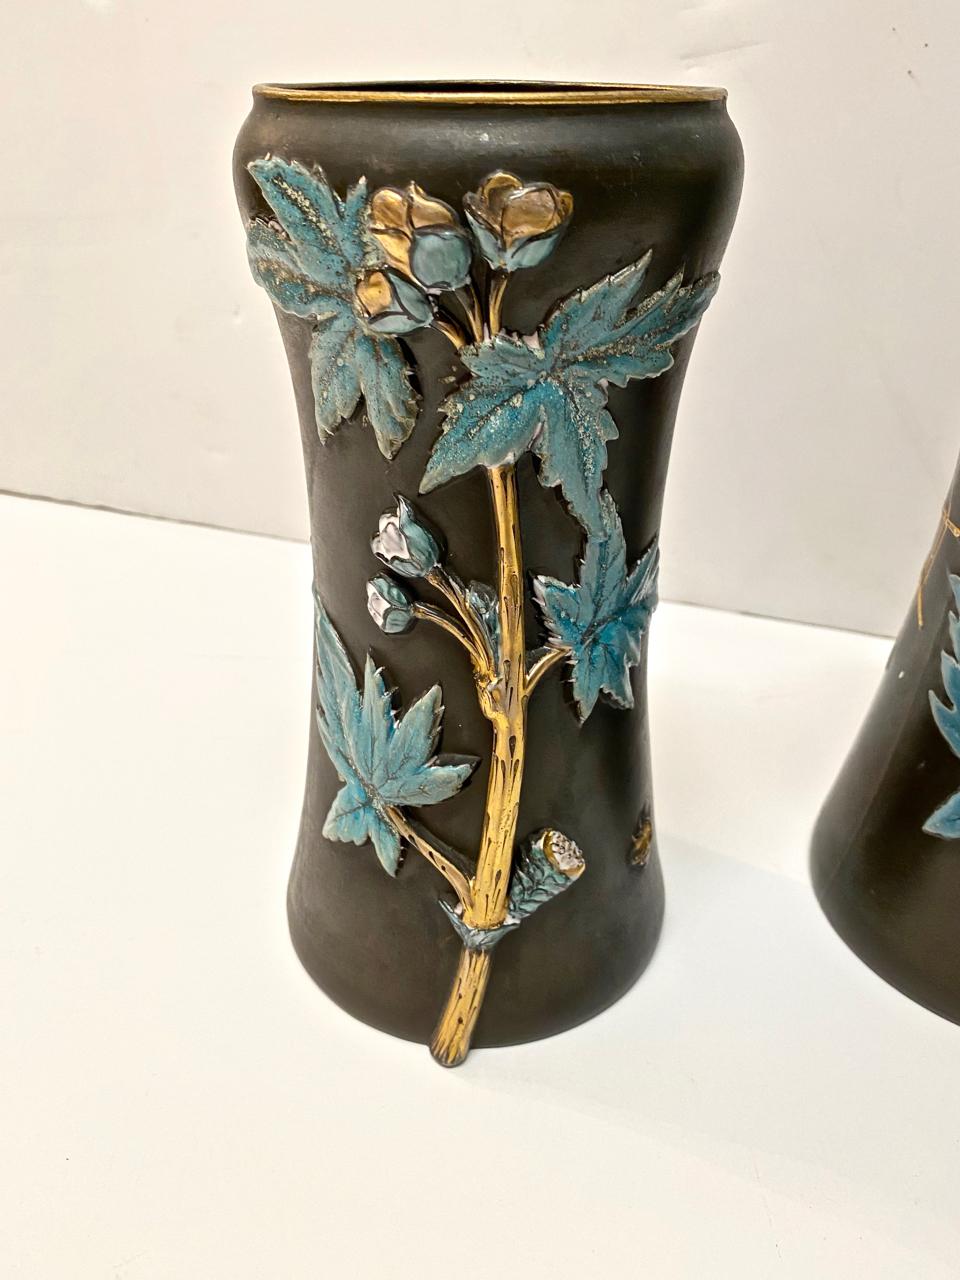 This is an unusual pair of aesthetic movement vases that date to circa 1880-1900. Both vases, although very similar, are not identical, they are decorated in raised applied florals and spiders. The vases are unmarked, but appear to be English in